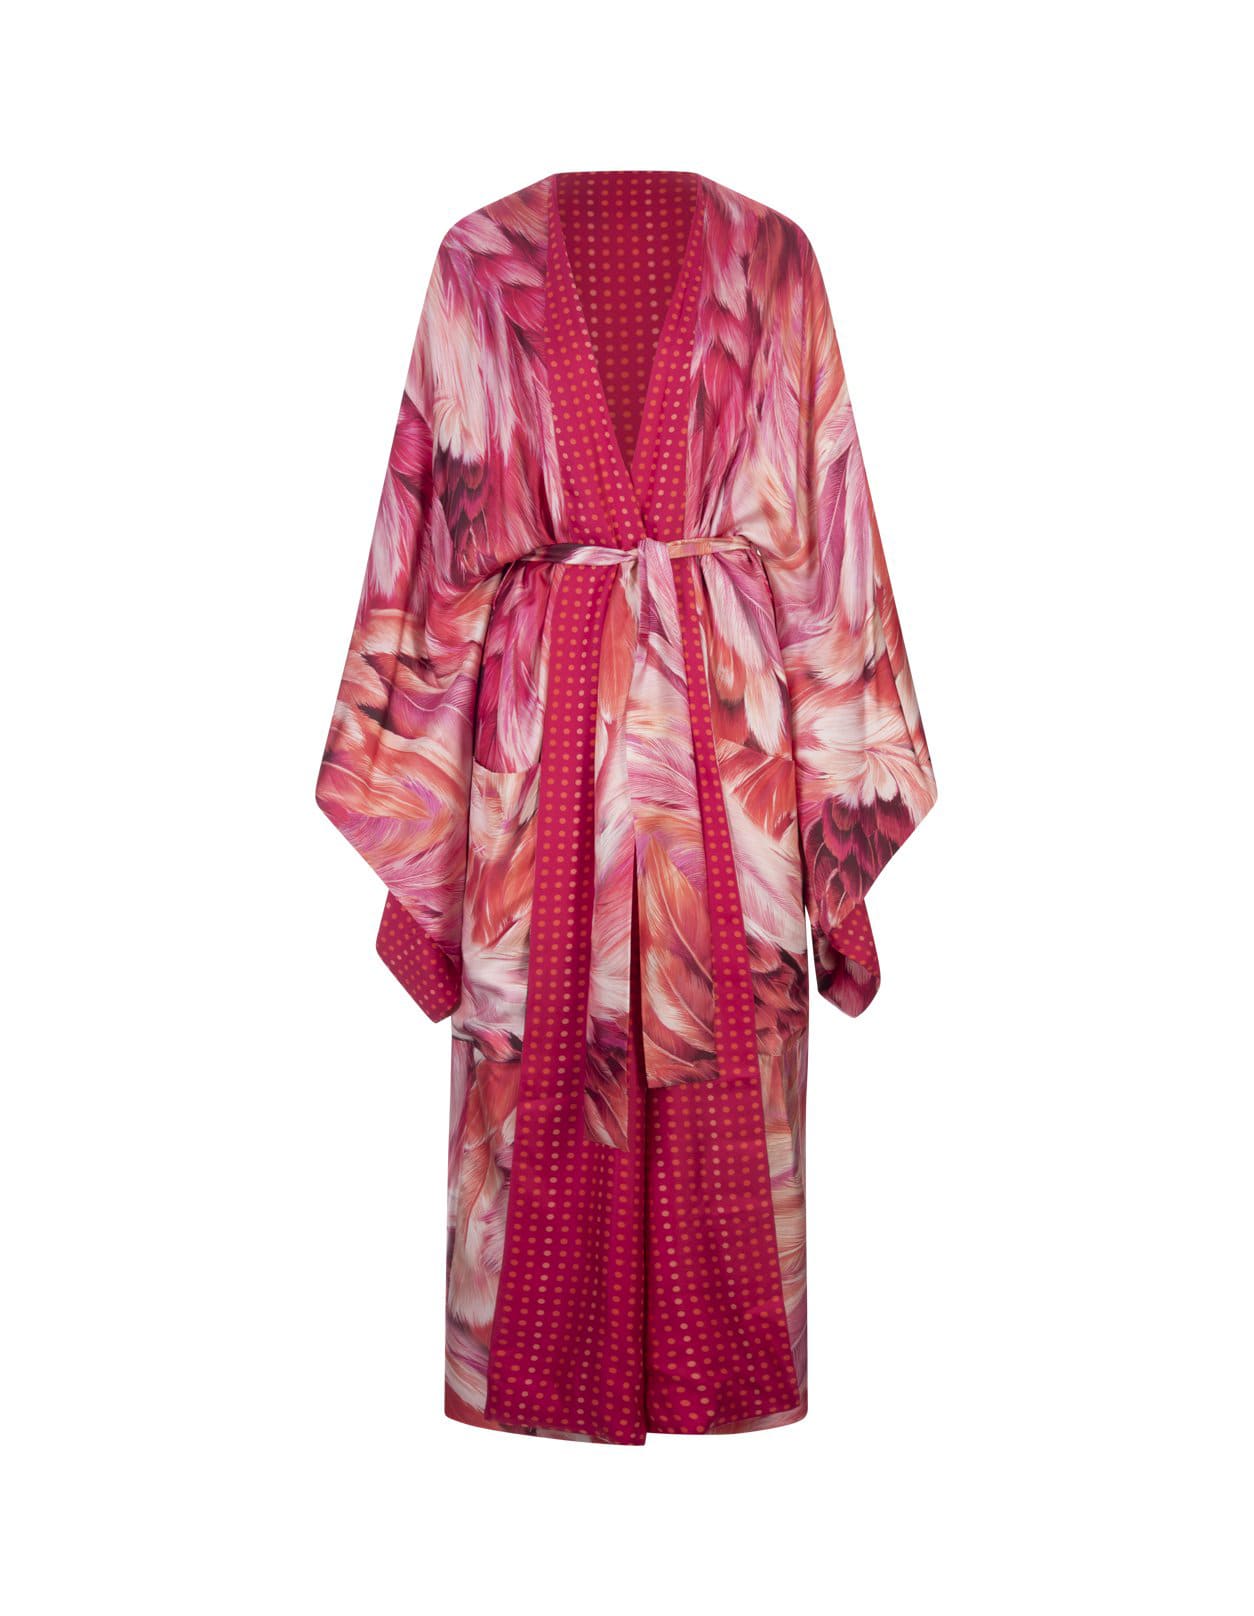 Reversible Long Dress With Pink Plumage Print